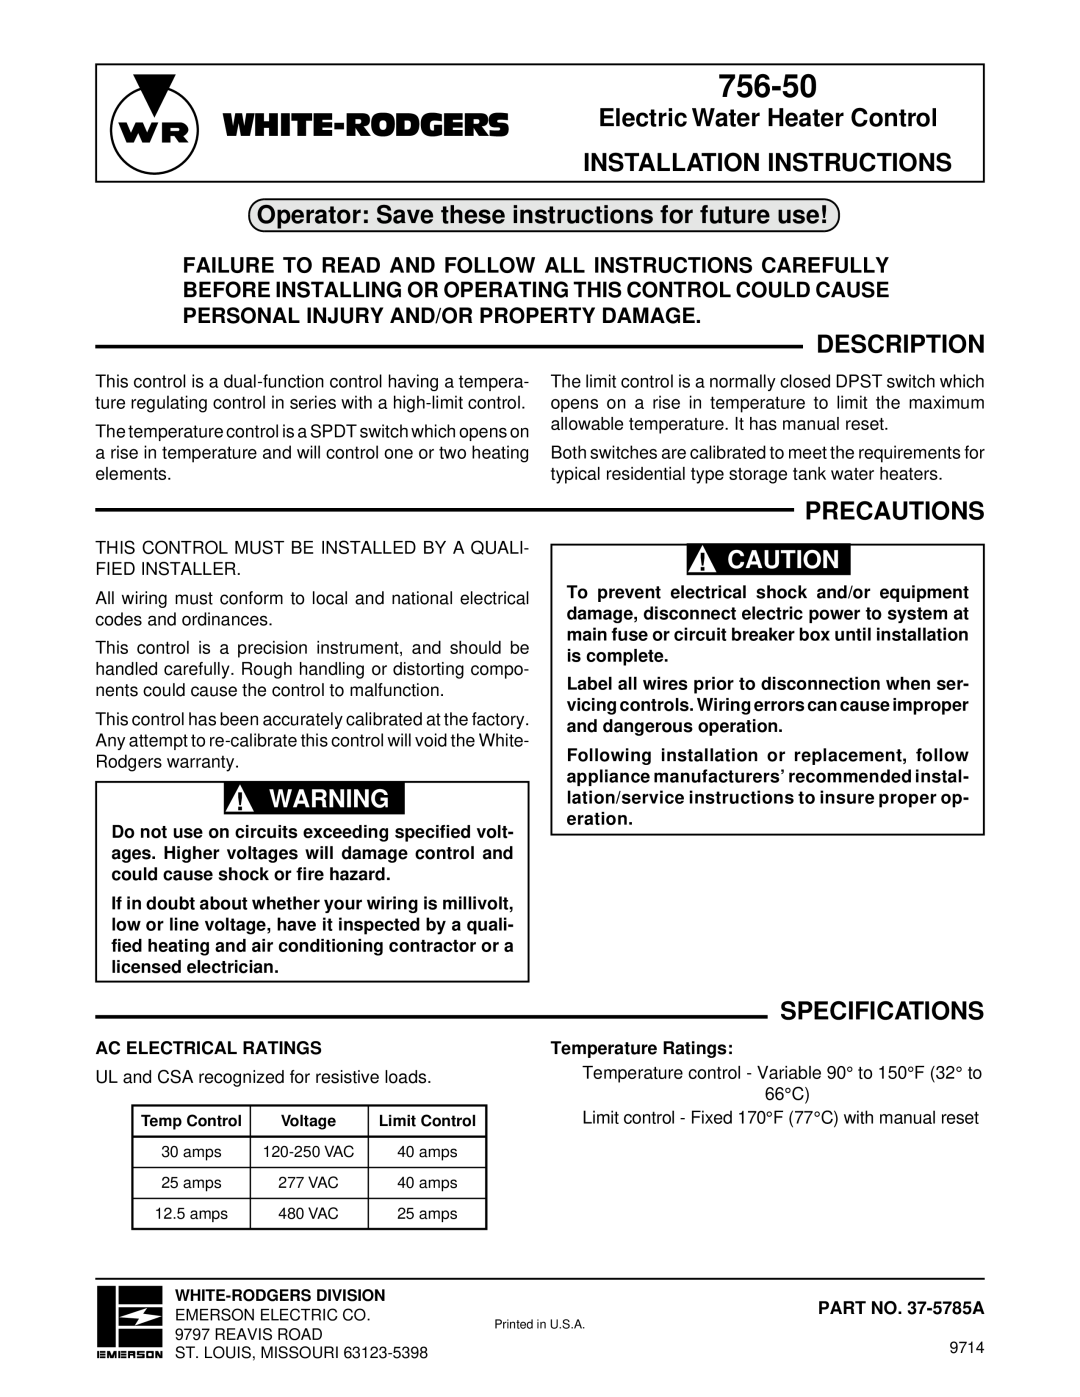 White Rodgers 756-50 specifications Operator Save these instructions for future use, Description, Precautions 